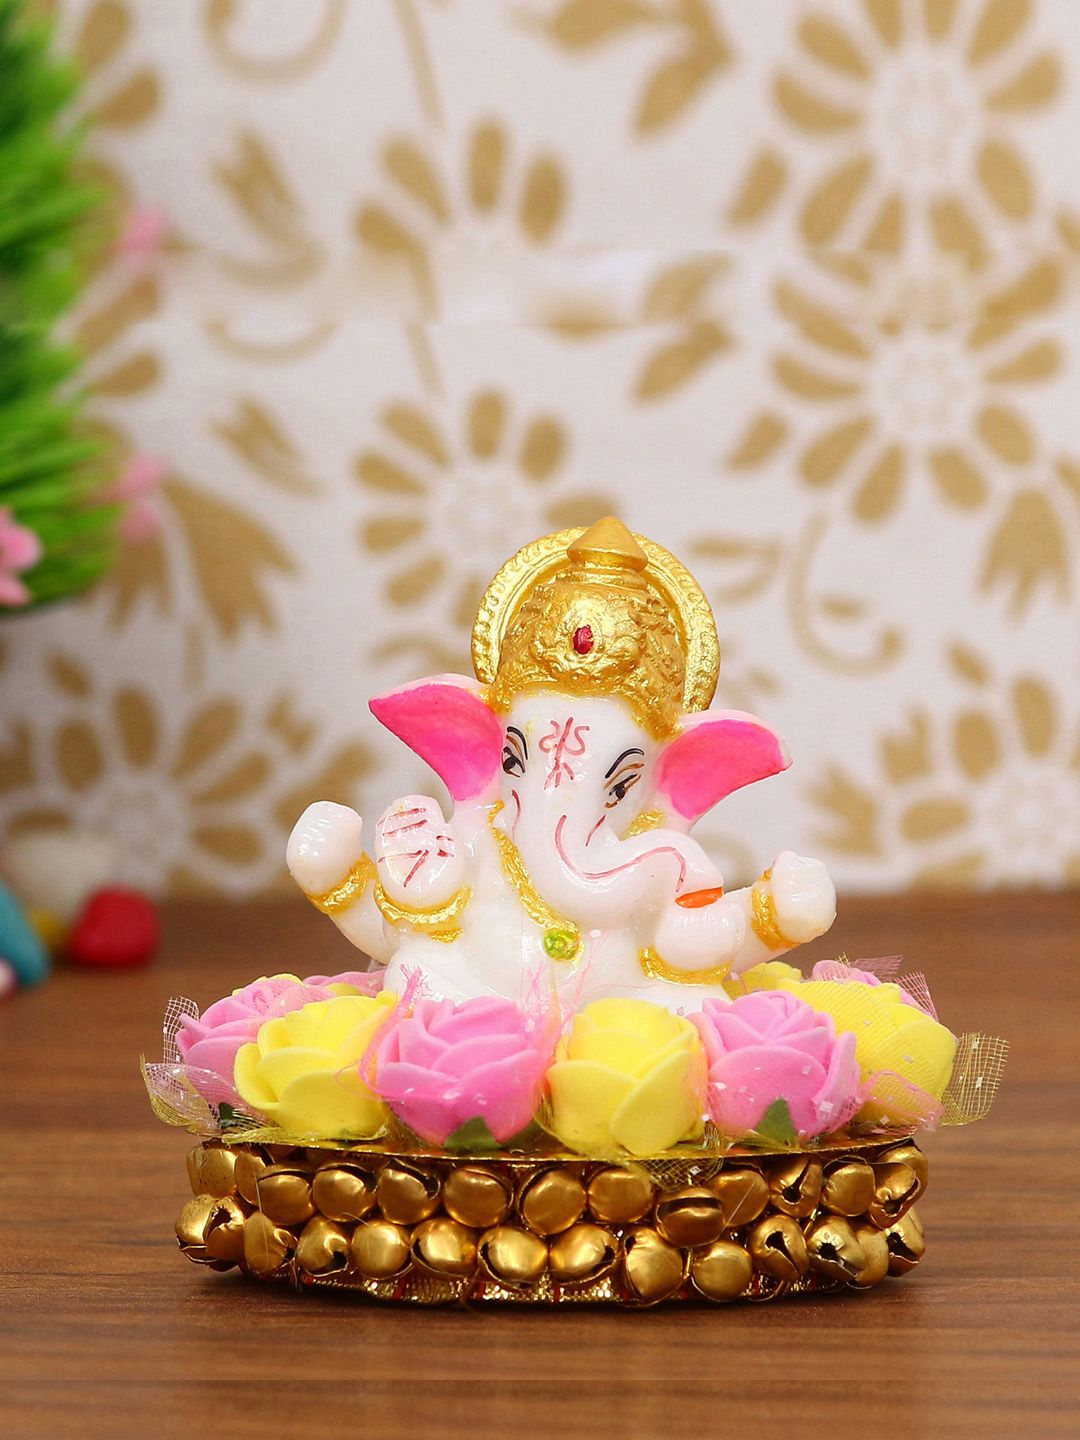 eCraftIndia White & Gold-Toned Handcrafted Lord Ganesha On Decorative Plate With Flowers Price in India